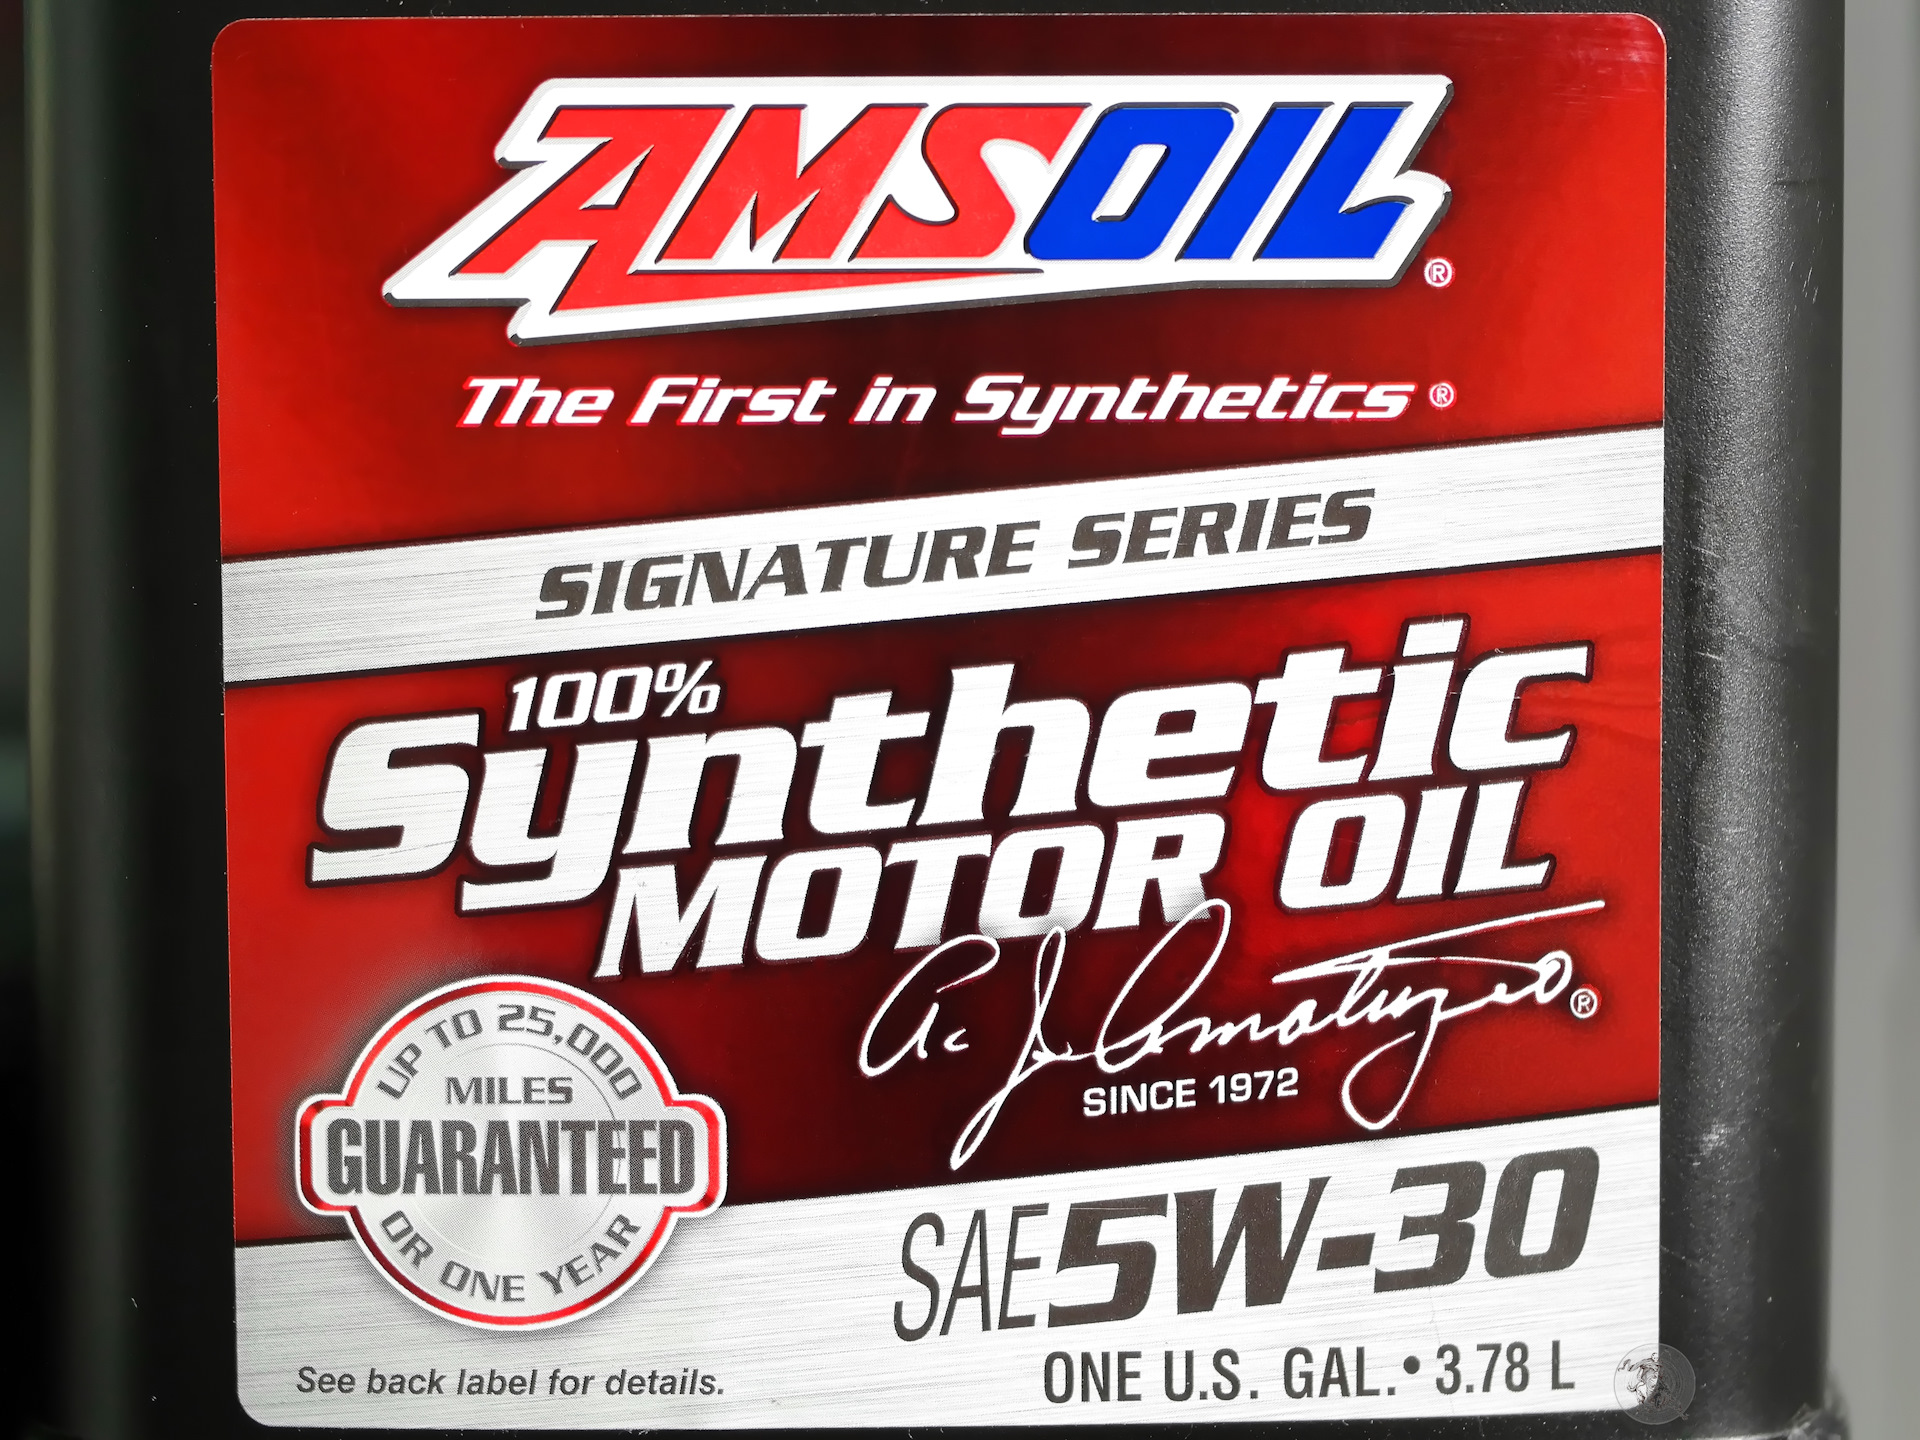 Signature series synthetic. AMSOIL 5w30 Signature. AMSOIL Signature Series 5w-30. AMSOIL Signature Series Synthetic 5w-30. AMSOIL Signature Series 100% Synthetic 5w30 (asl1g),.